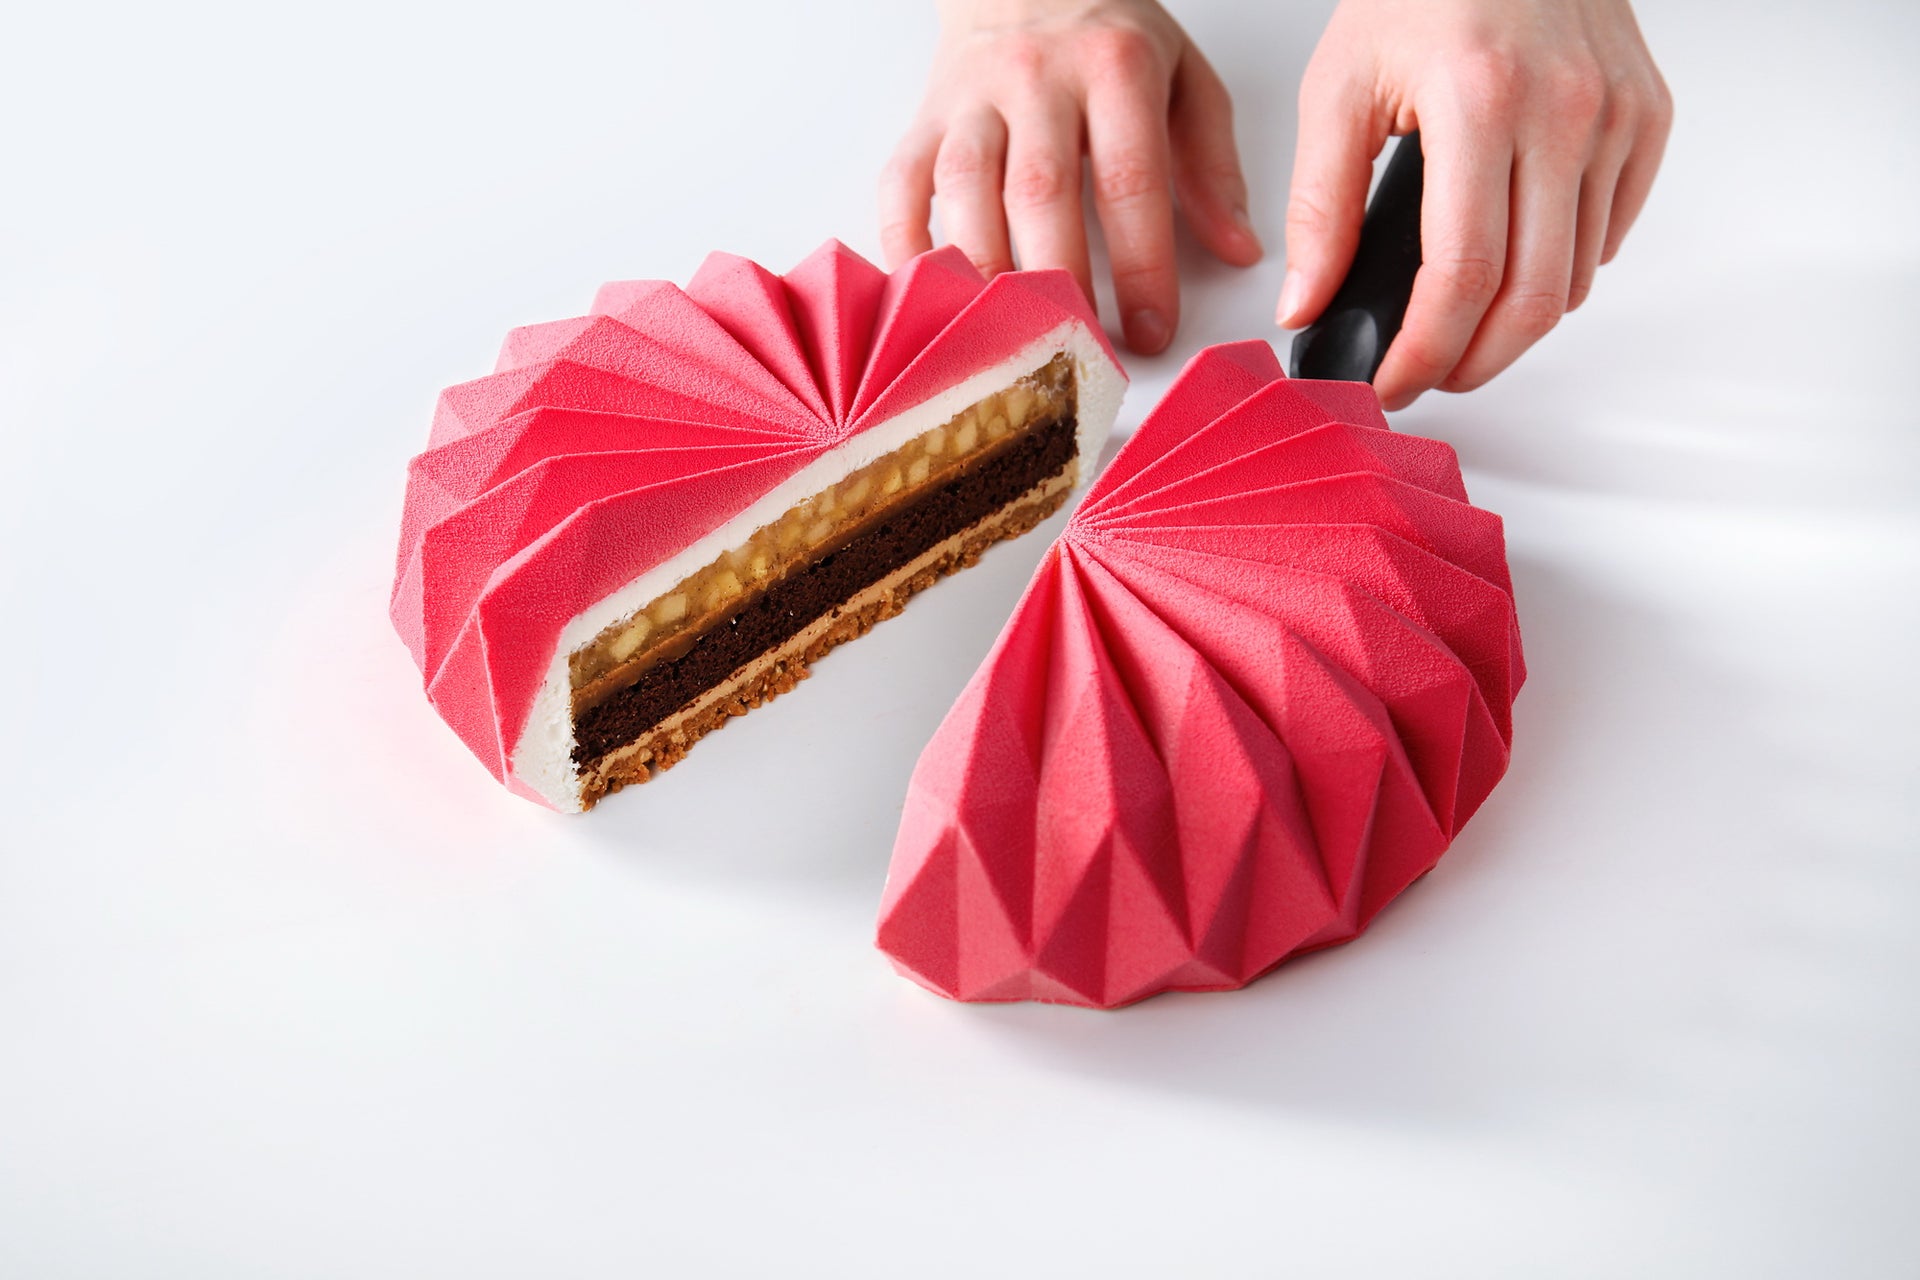 Load video: Origami Cake